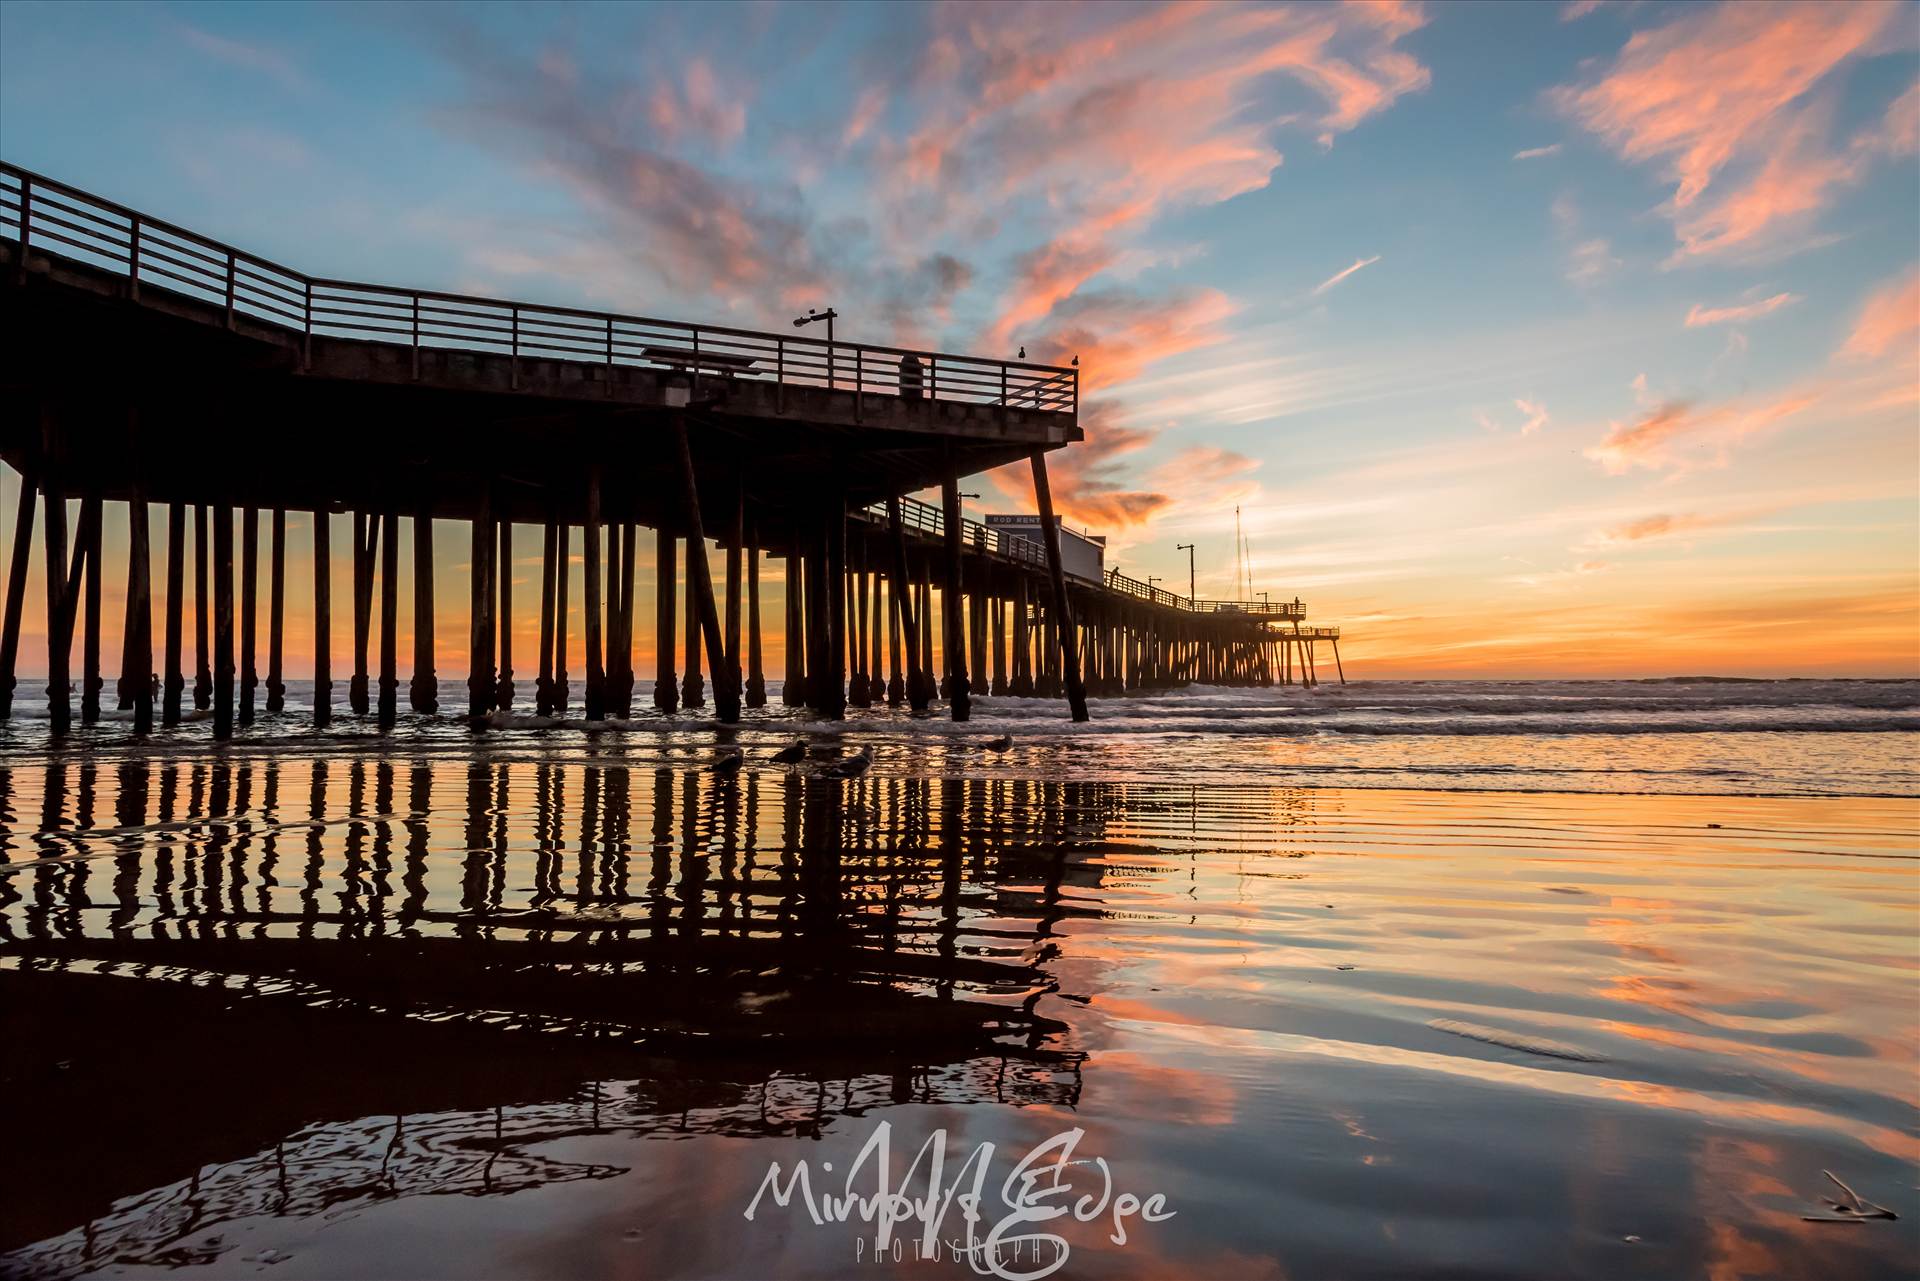 Fairytale Sunset Pismo Pier Reflection.jpg undefined by Sarah Williams